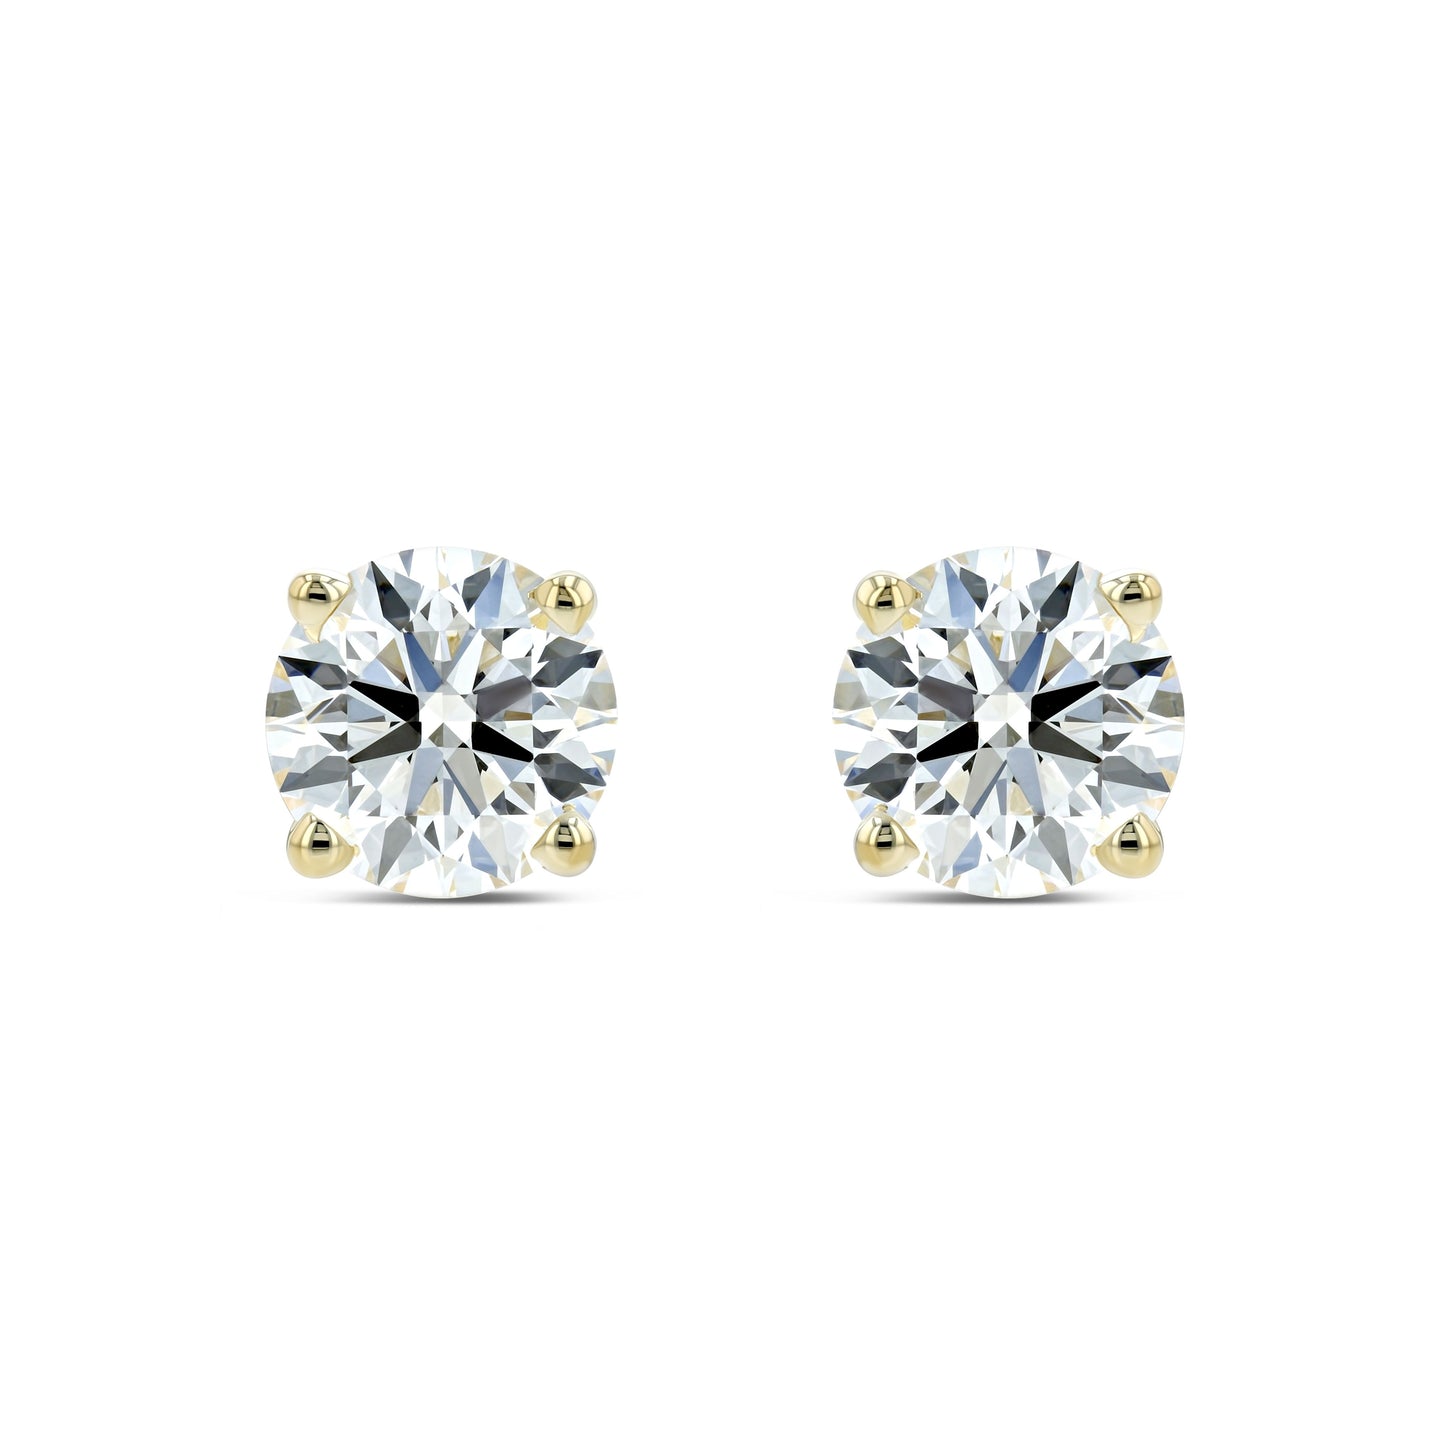 14k Yellow Gold 4-prong Round Diamond Stud Earrings 1/2ctw (4.0mm Ea), M-n Color, Si2-si3 Clarity